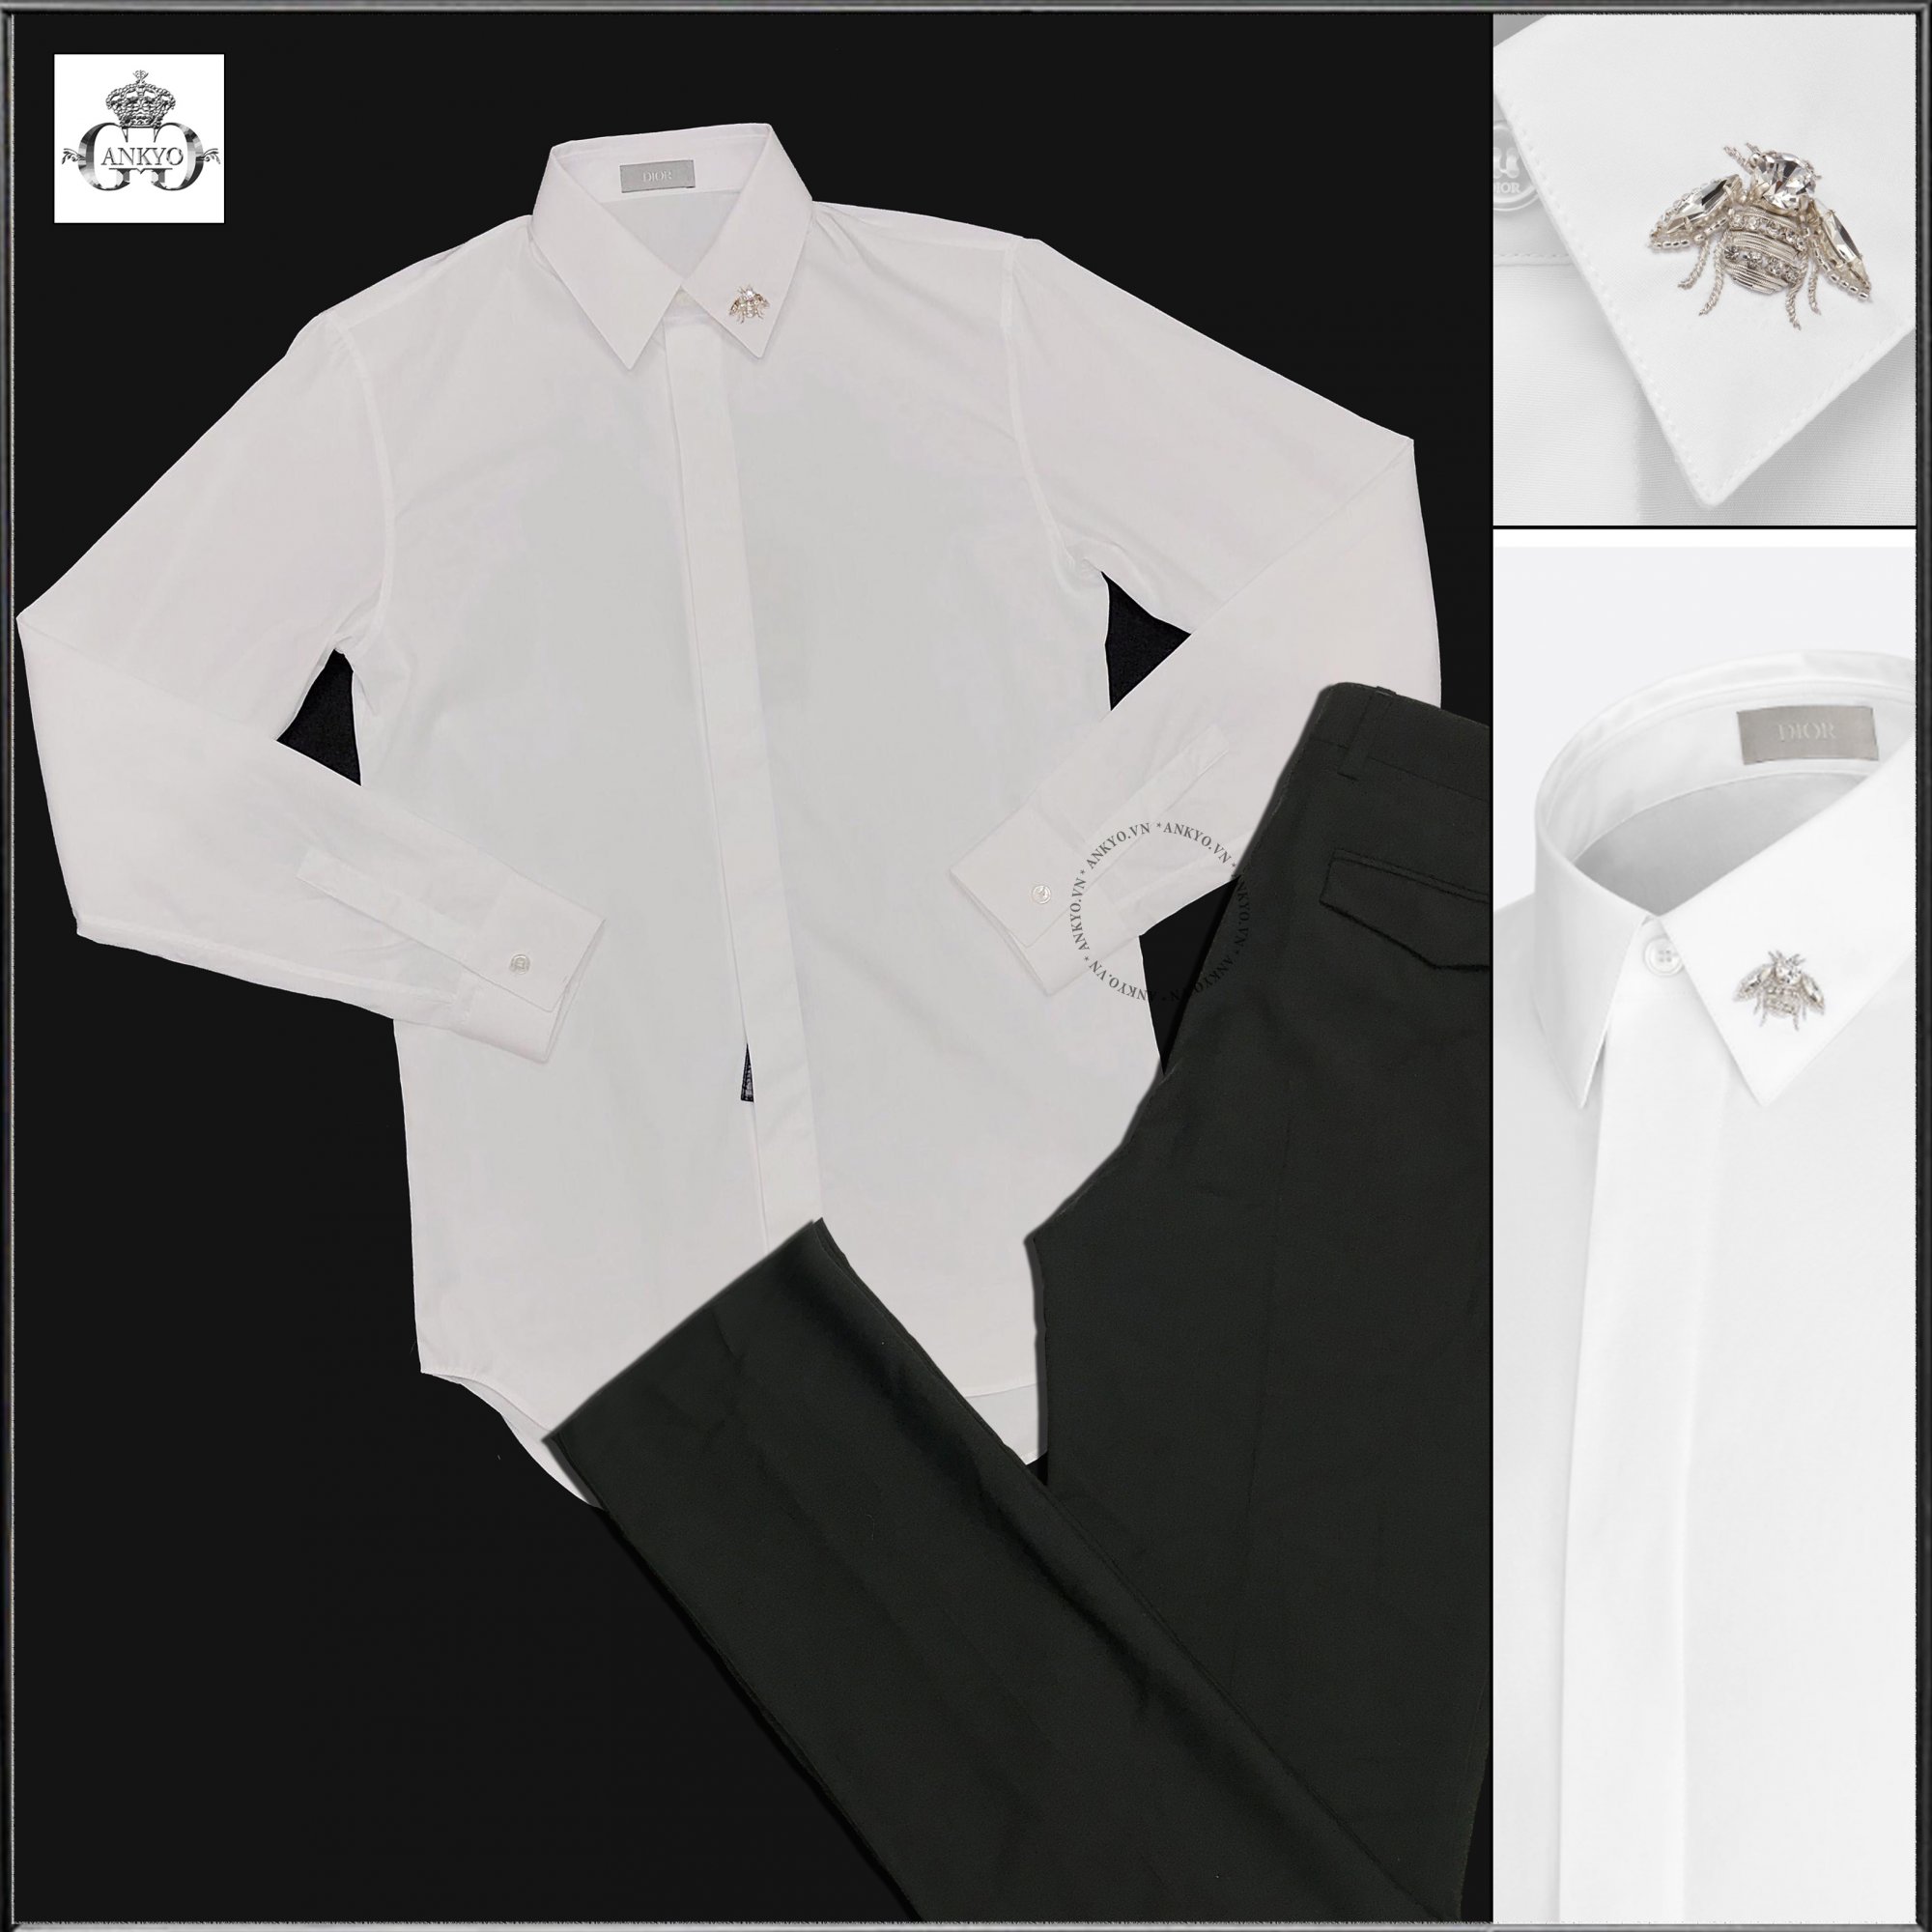 DIOR HOMME Shirt With Bee Jewel White Cotton Poplin (Ong 3D) (1).jpg